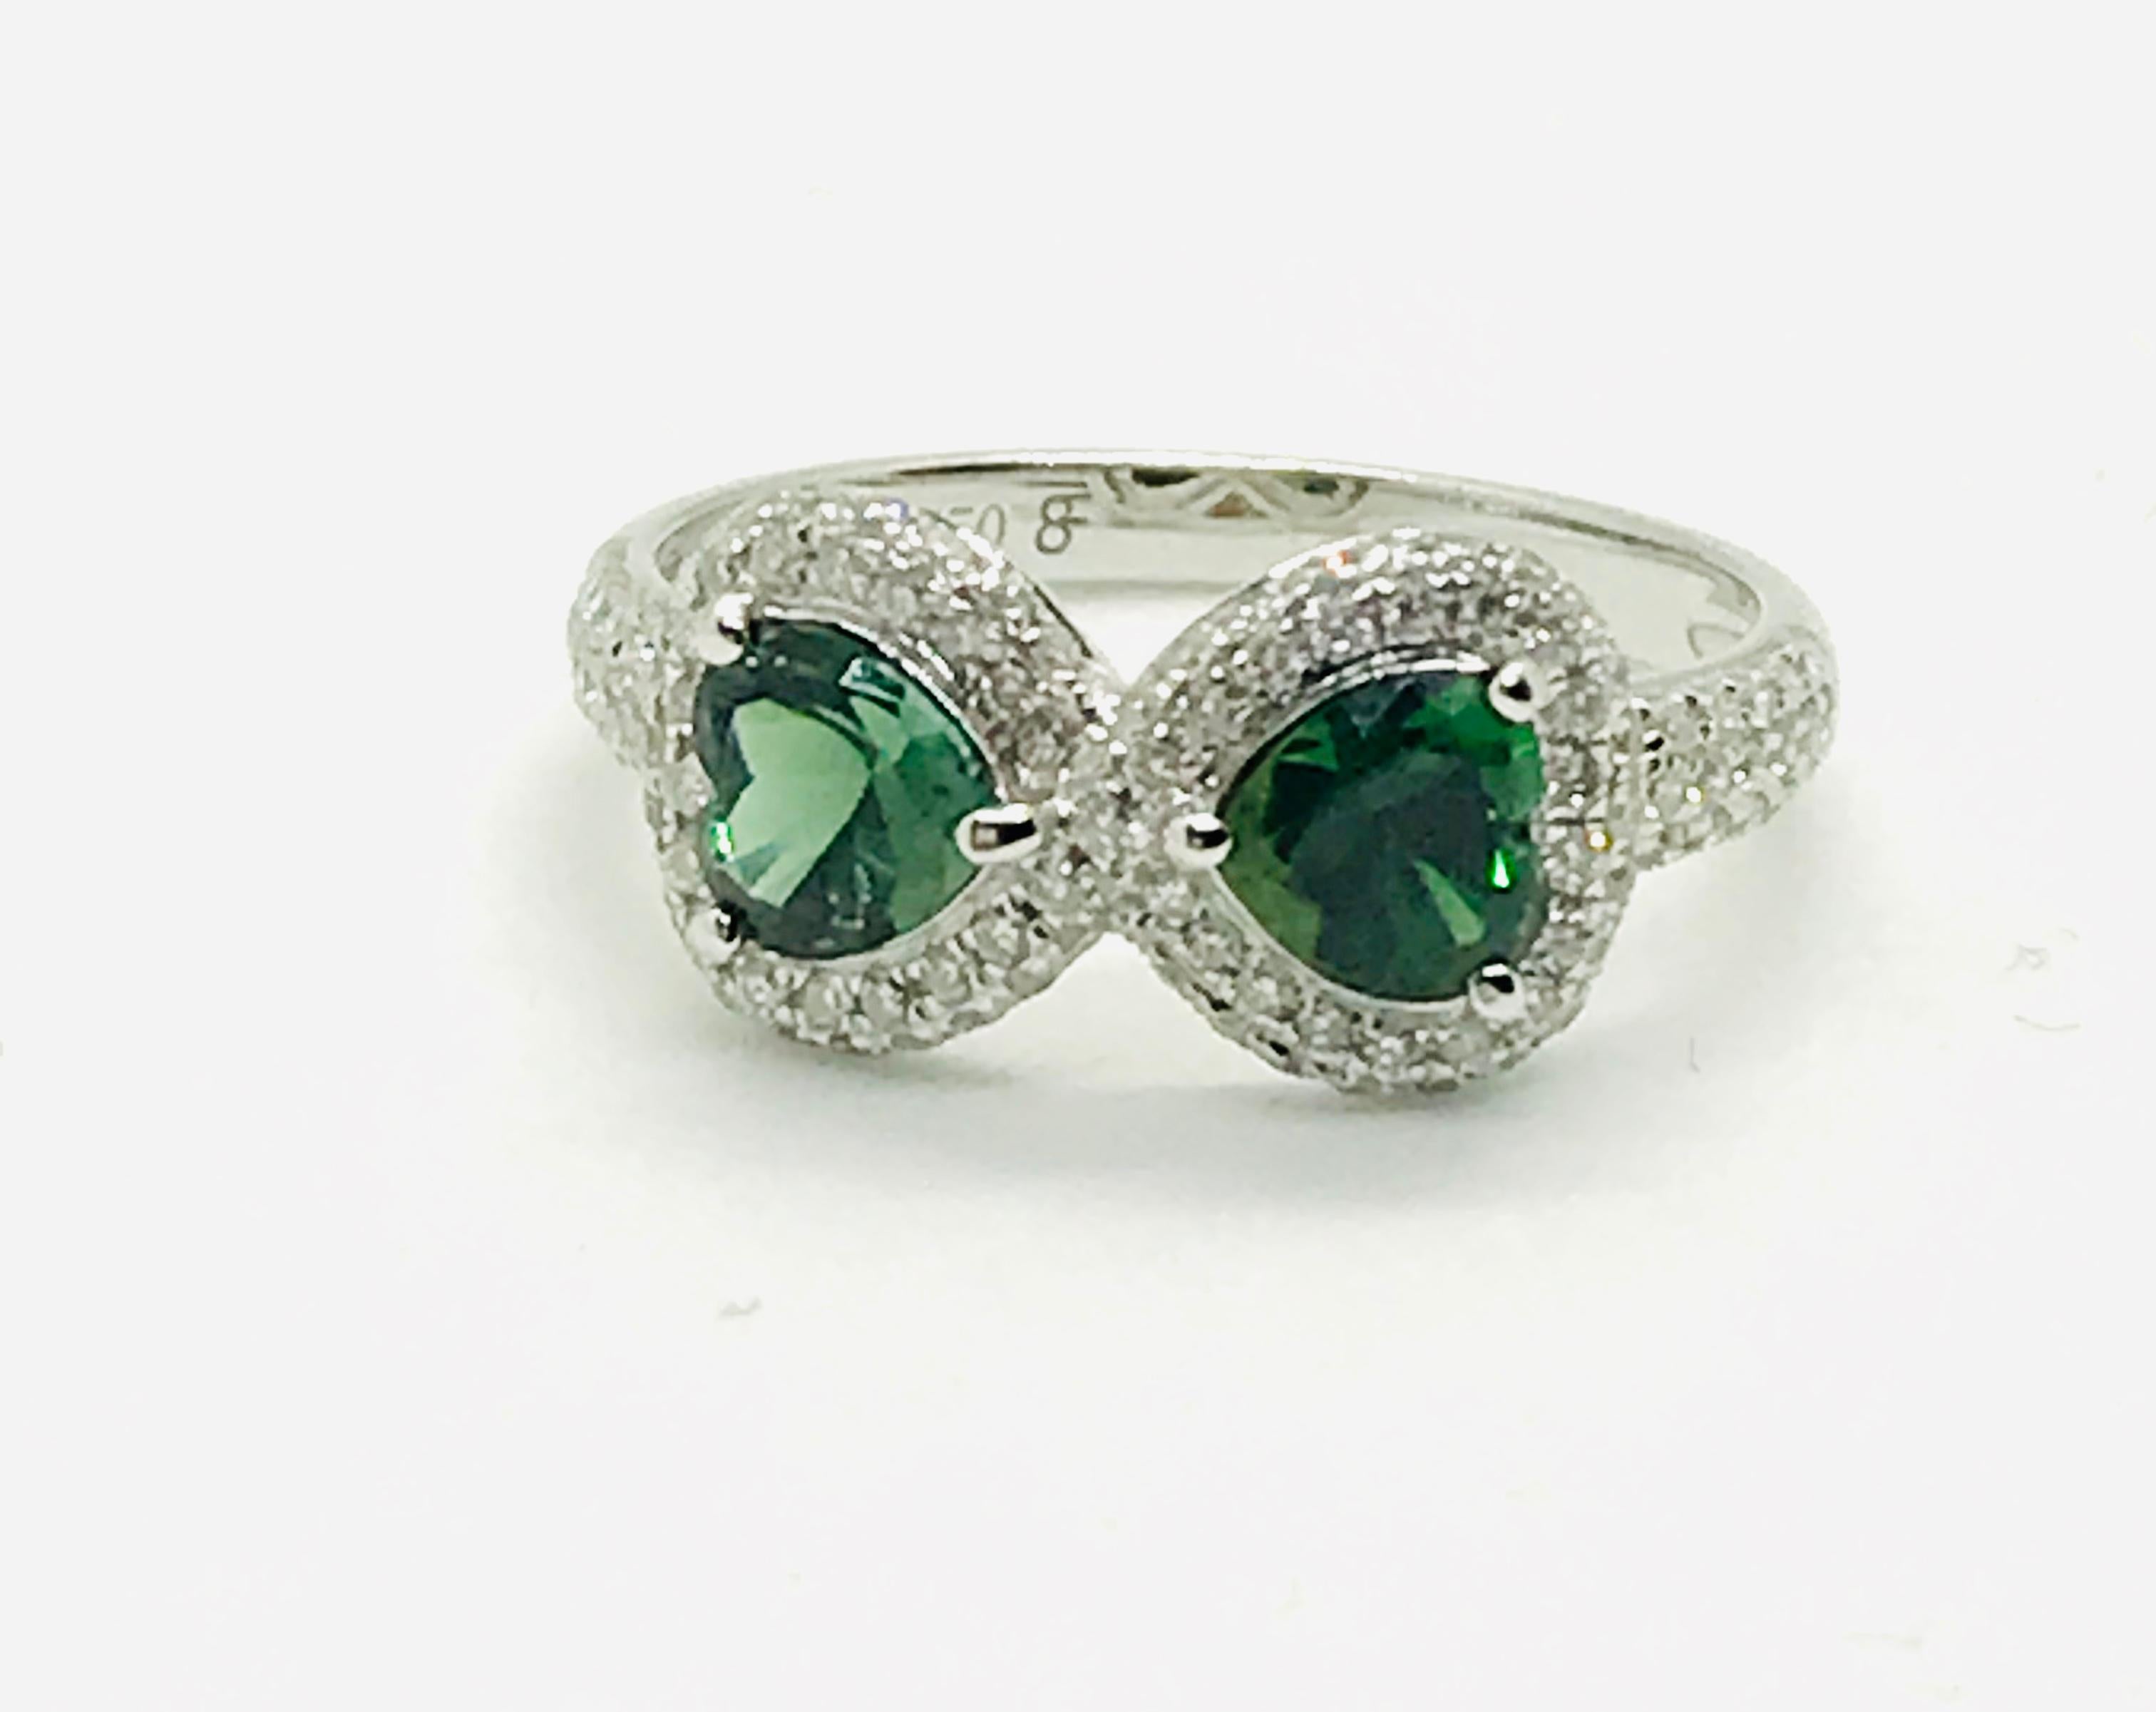 A 18K White gold, diamonds (0,385 ct) and heart-shaped Green Tourmalines (0,91 ct).
Size 53.                 
“Infinite Eight of hearts” diamonds and colored stones rings carry deep meaning : number eight brings prosperity and luck : when